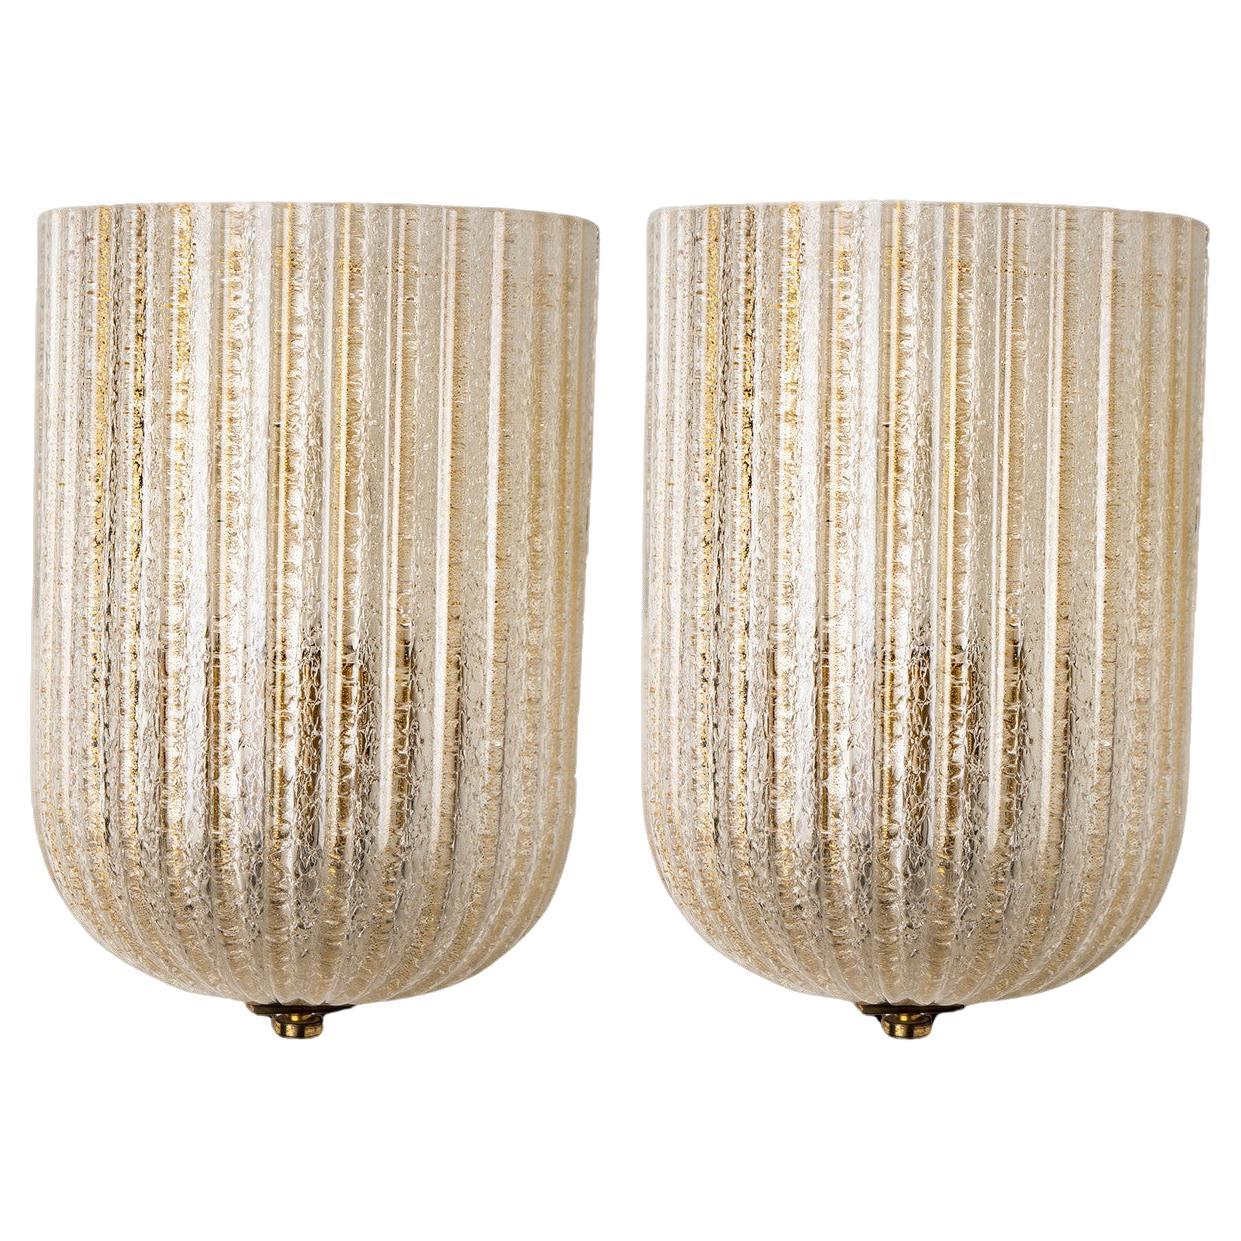 1 of 2 Fluted Murano Glass Wall Sconces Barovier, Italy, 1960s For Sale